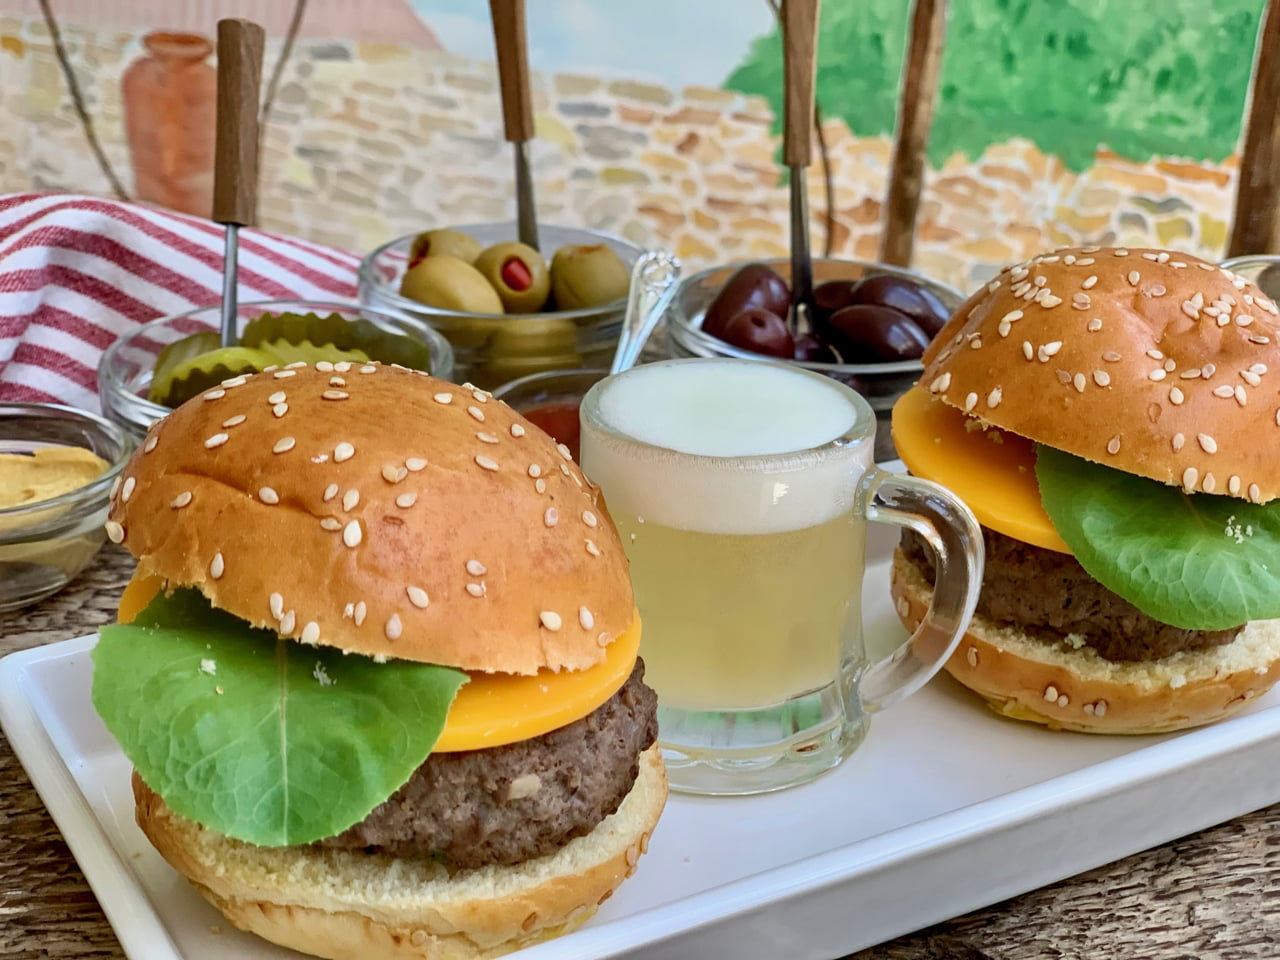 Homemade Sliders and Buns - The Better Burger